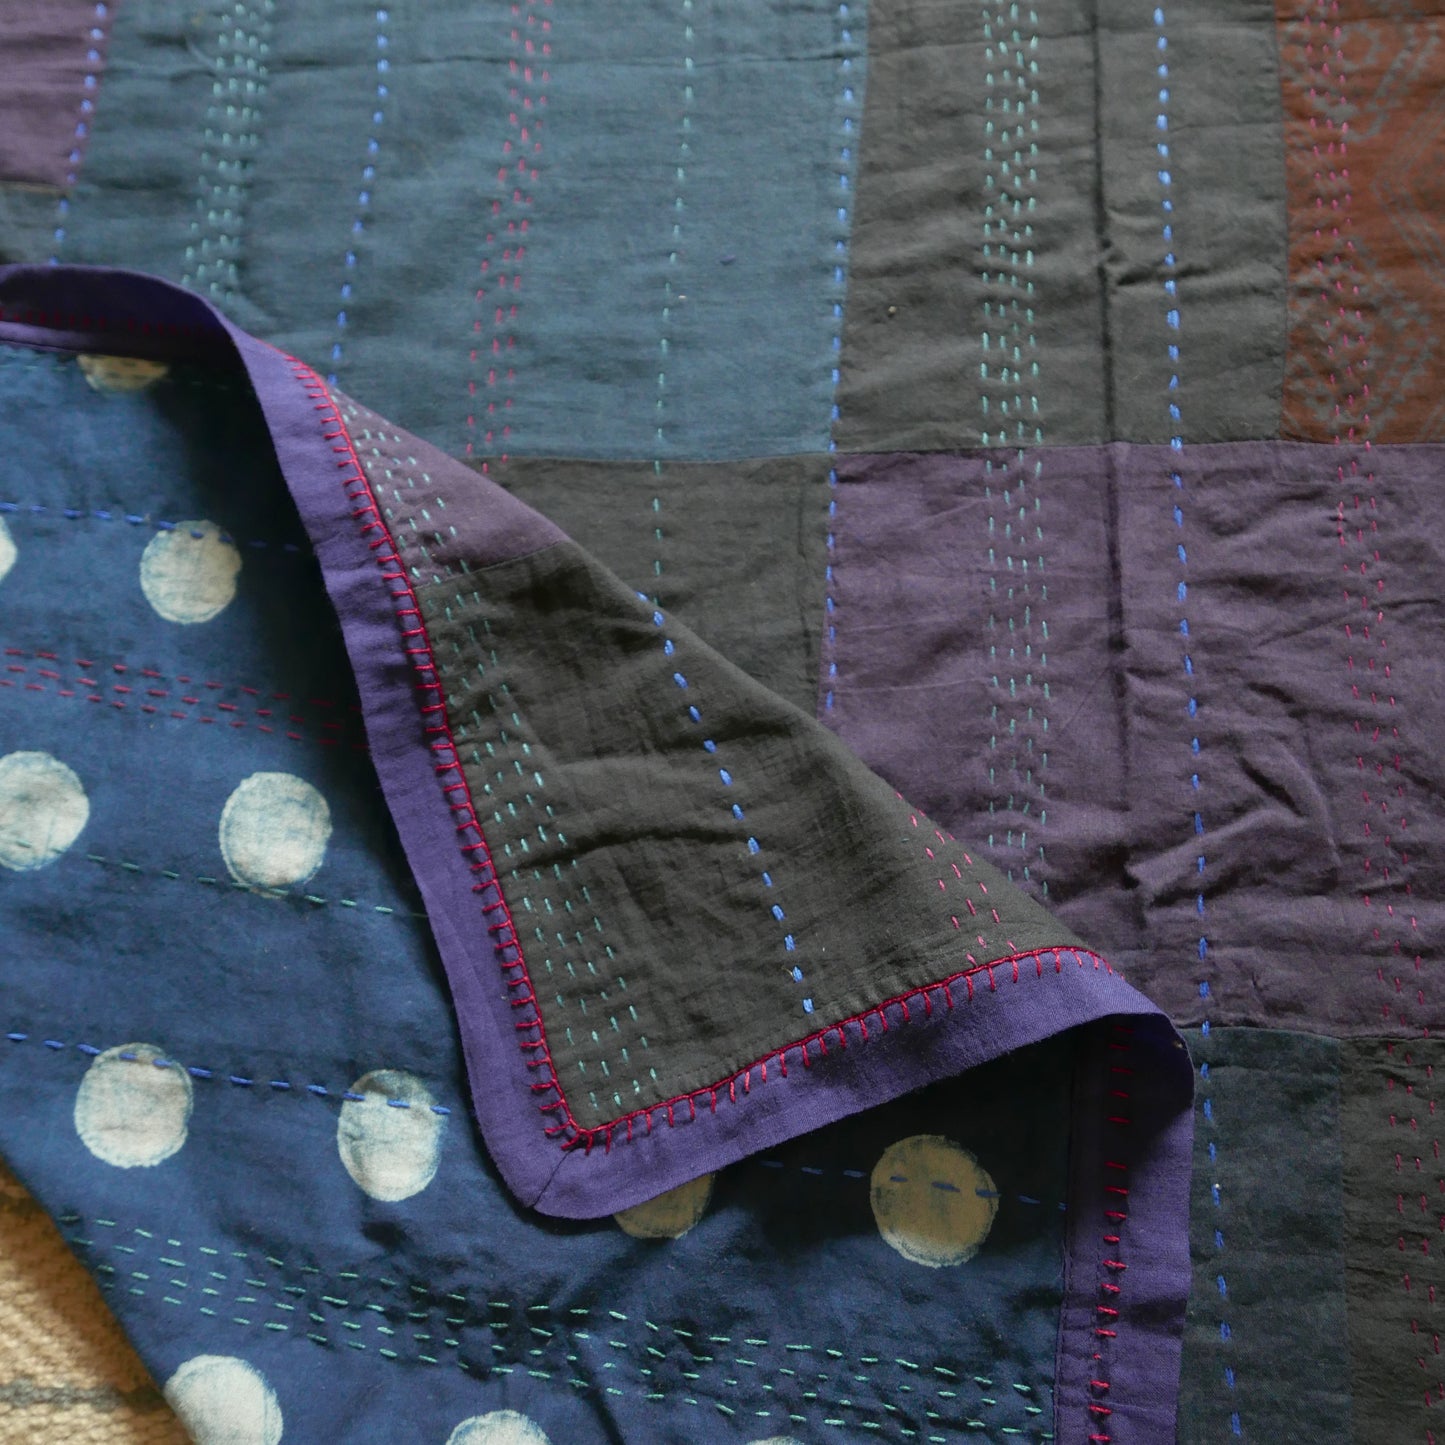 Aubergine Indigo Patch Embroidered Throw / Quilt (MADE TO ORDER)